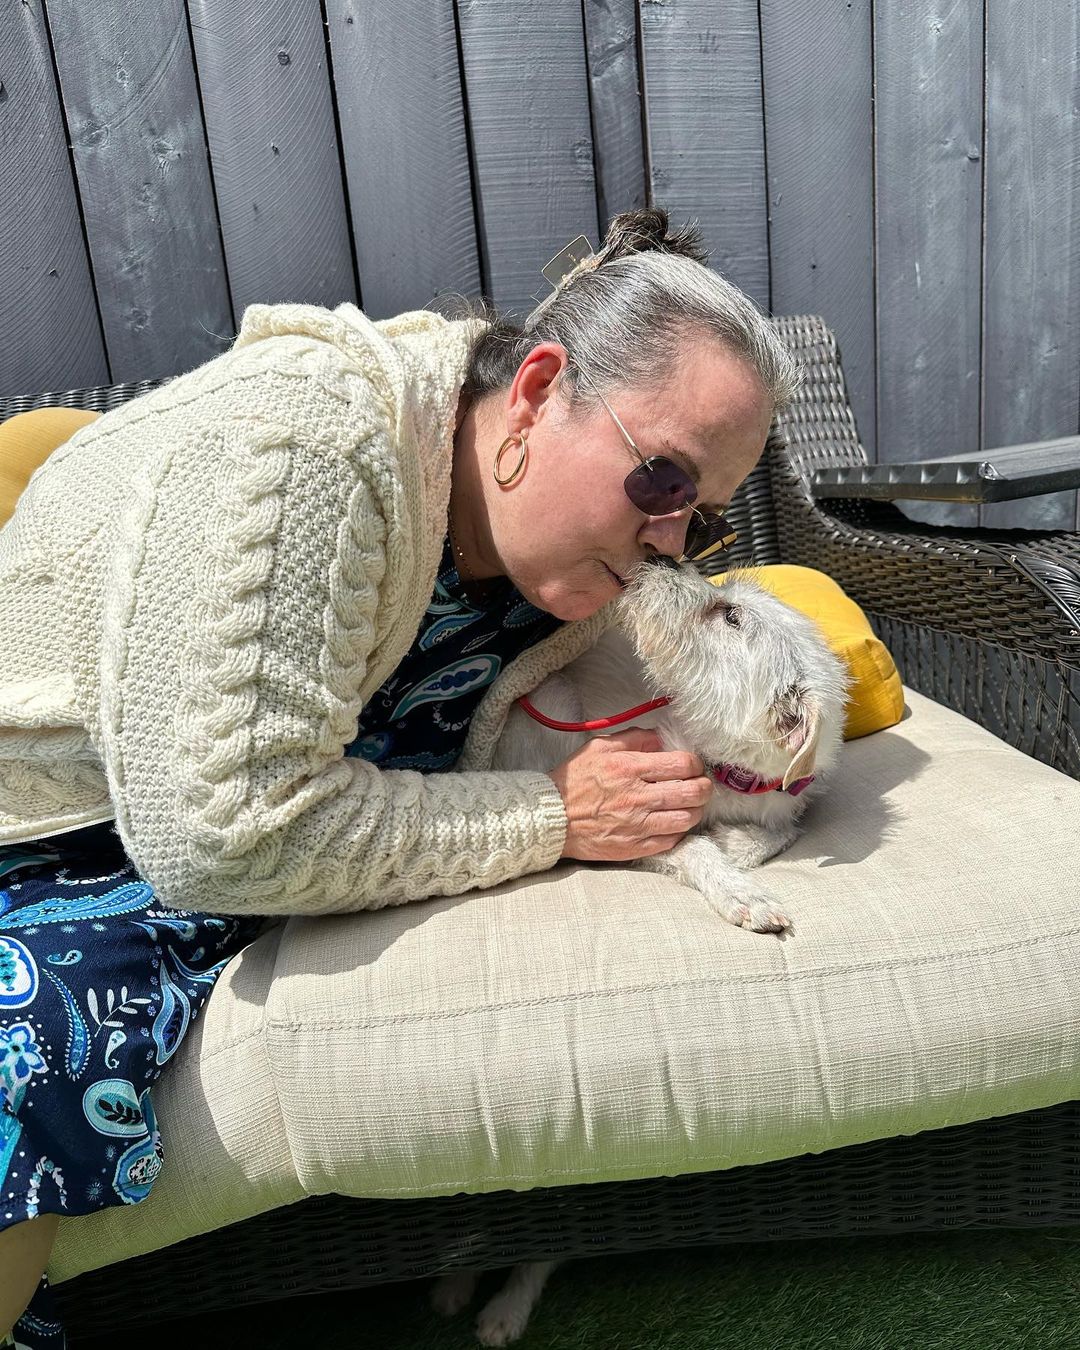 Suzette Hall kissing small white dog on face.